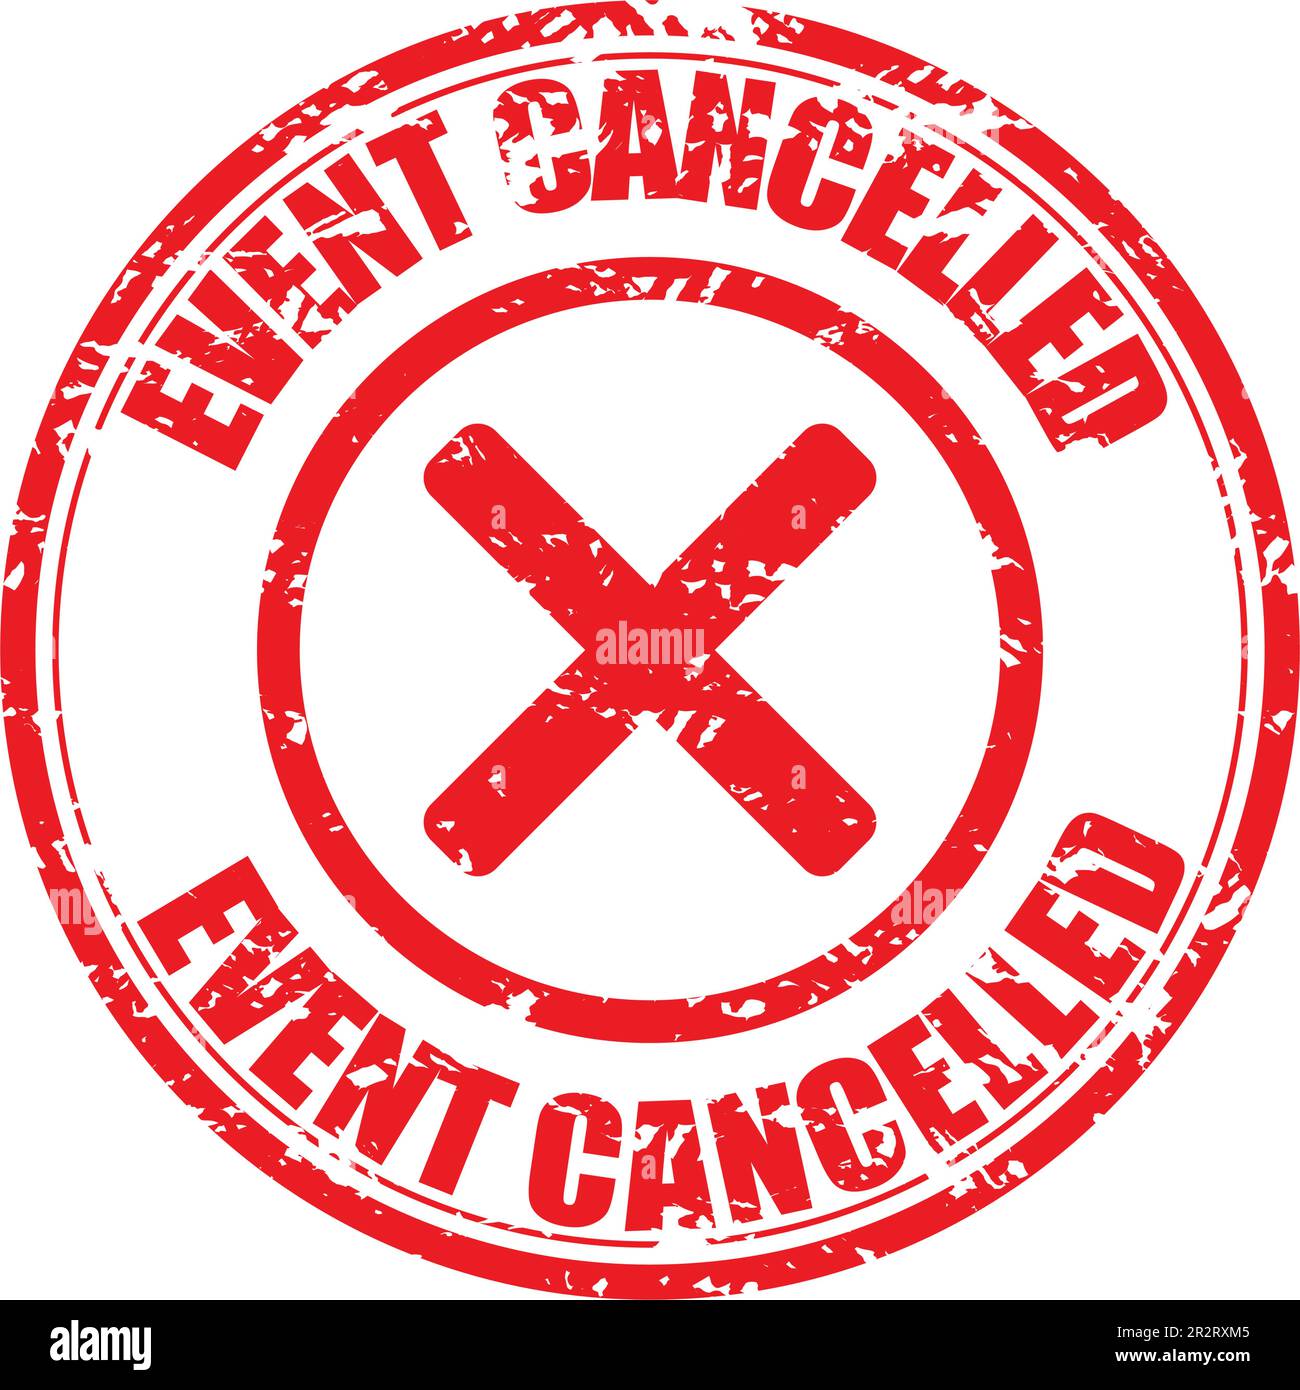 Event cancelled mark rubber stamp with cross. Vector illustration. Cancelled meeting, paperwork rubber stamp, announcement change deadline, rejected d Stock Vector